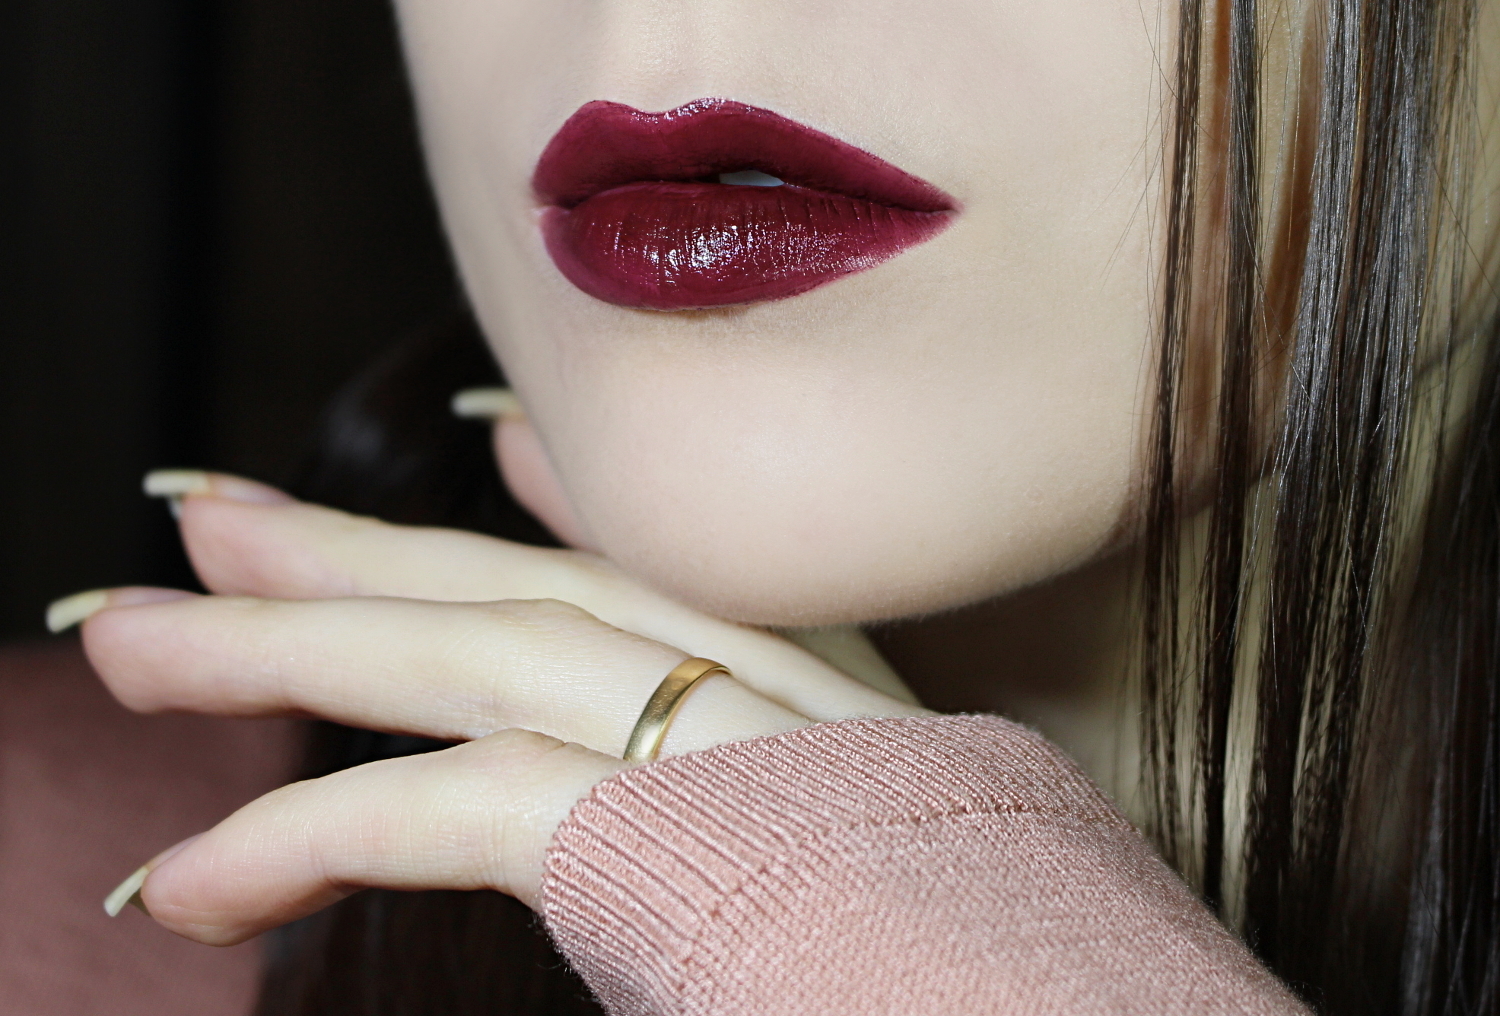 blogger Liz Breygel demonstrates a close-up of her lips with a dark lipstick by City Color Cosmetics